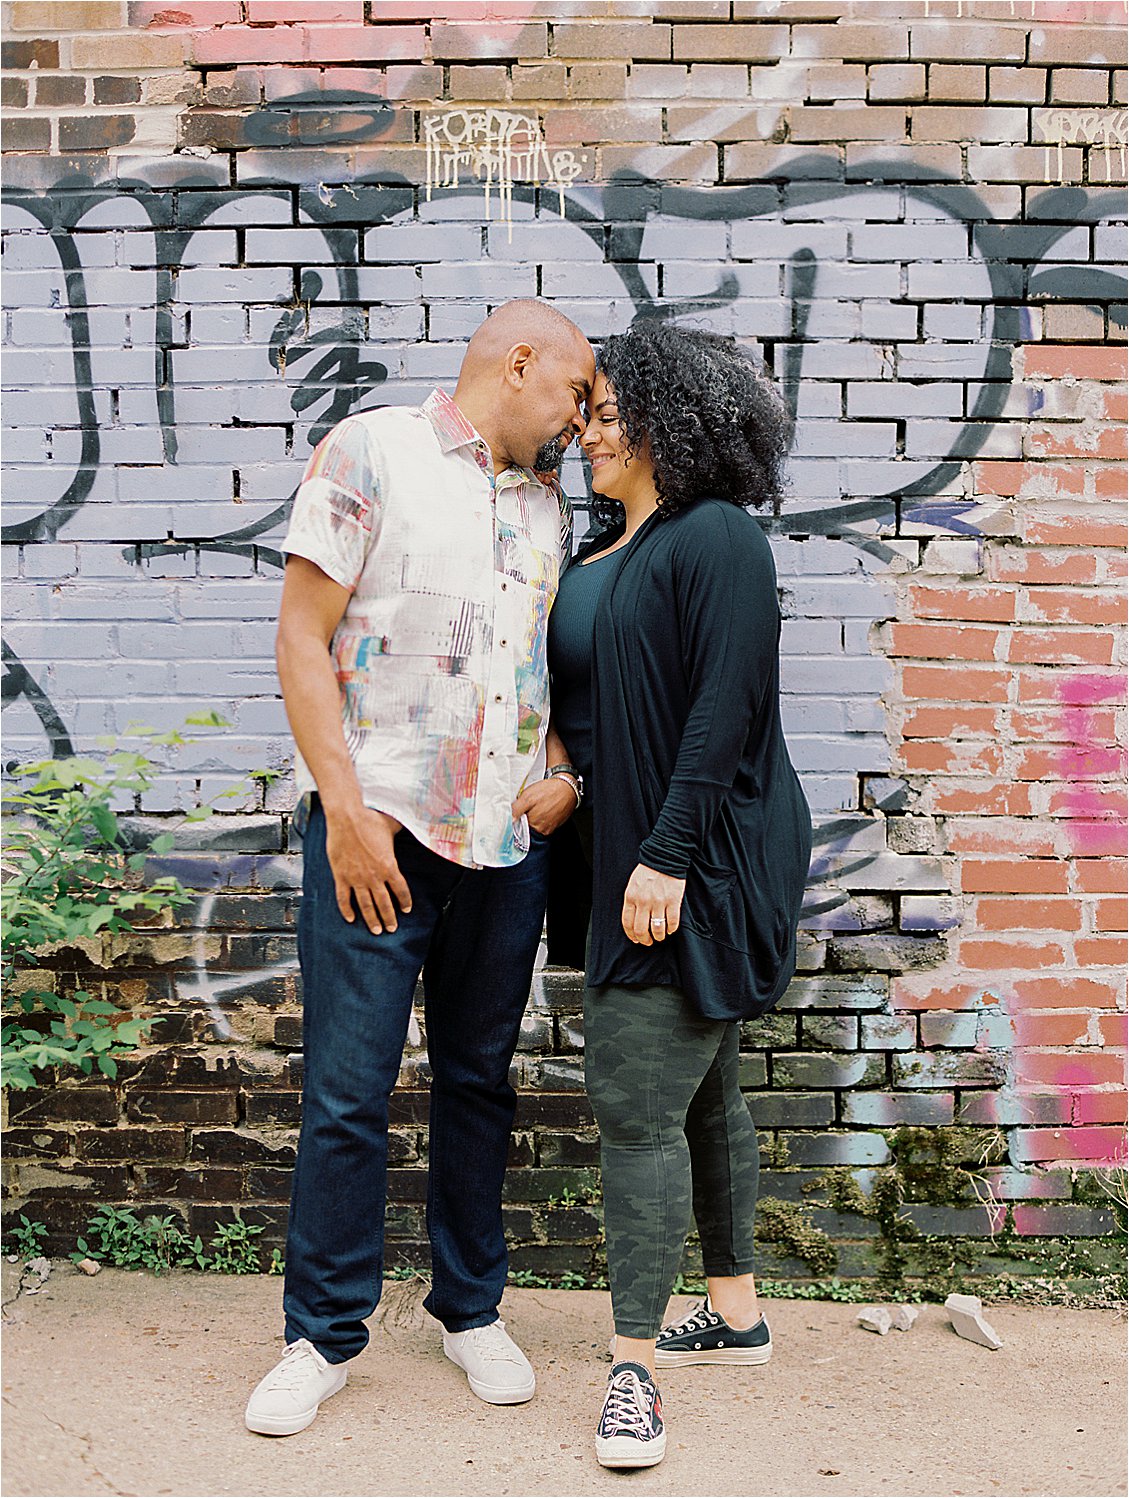 Urban & Gritty Union Market Engagement Session with DC + Destination Film Wedding Photographer, Renee Hollingshead